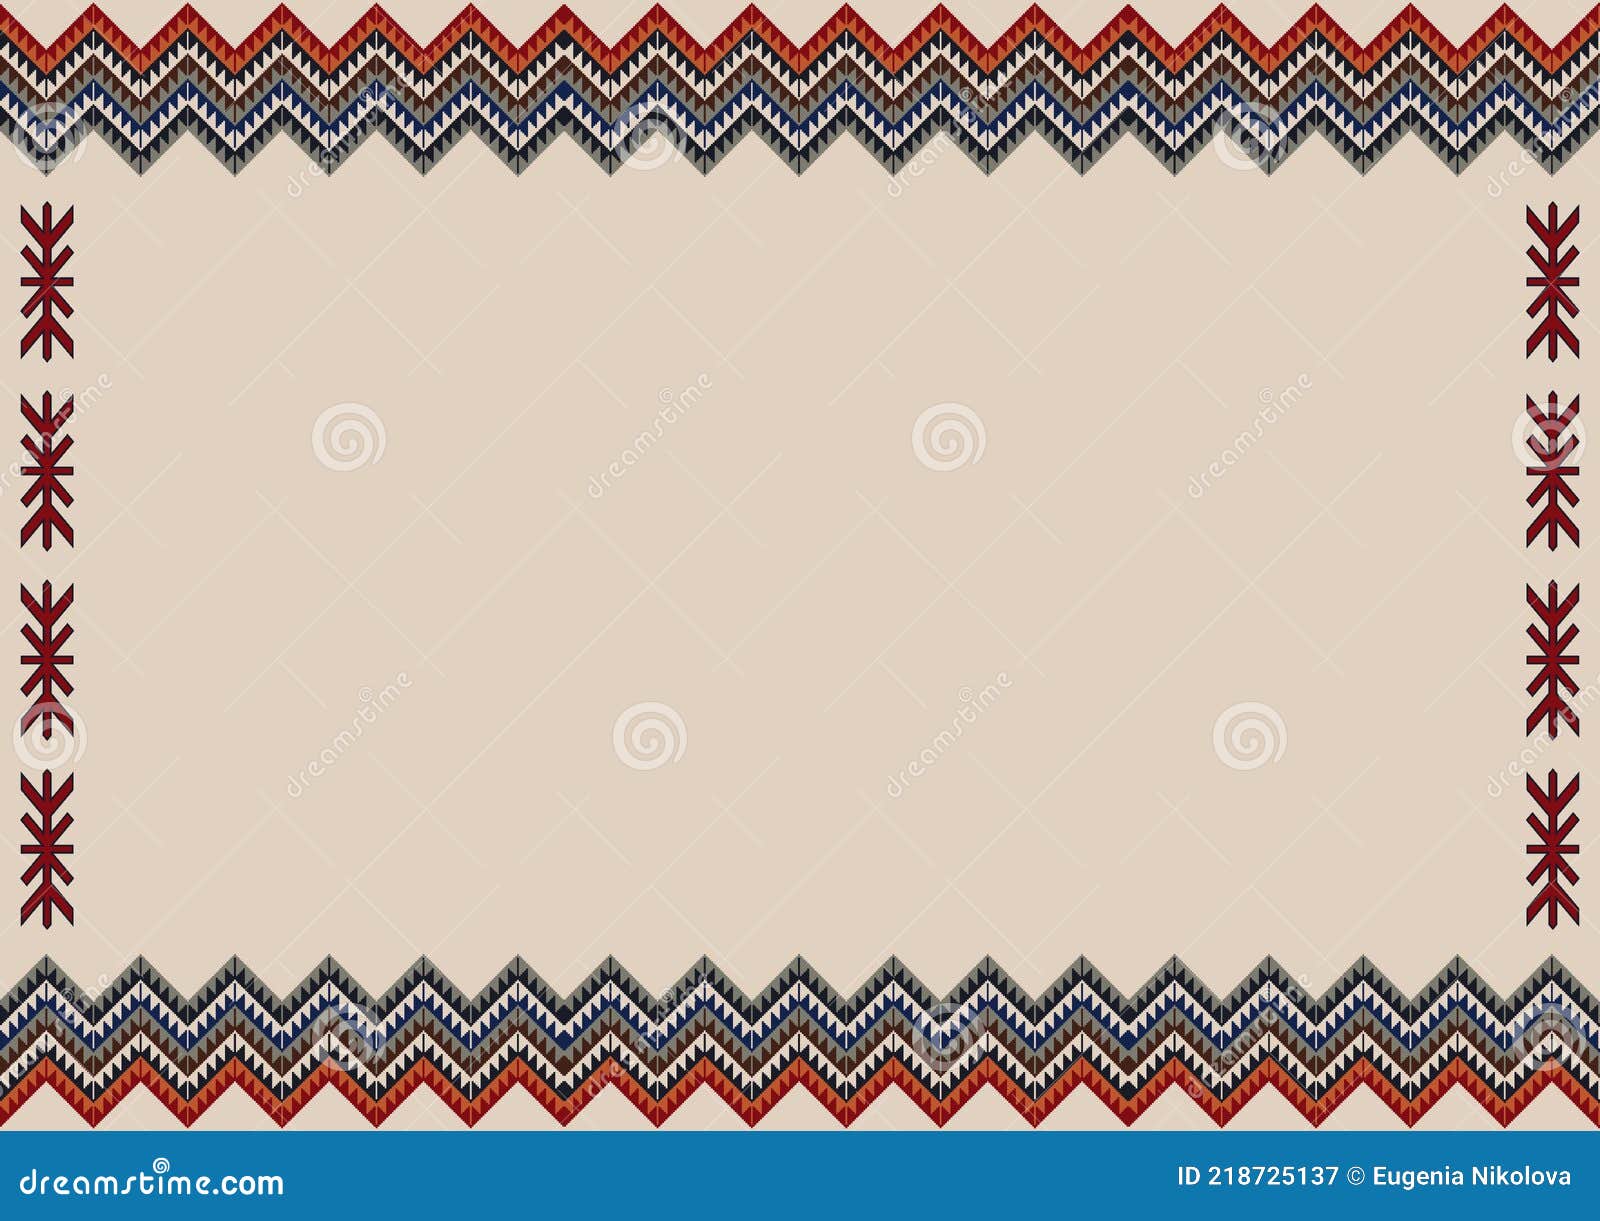 Ethnic Tribal Pattern Background with Copy Space for Text. Native Indian  Border Ornament with Navajo Design Elements Stock Vector - Illustration of  backdrop, boho: 218725137